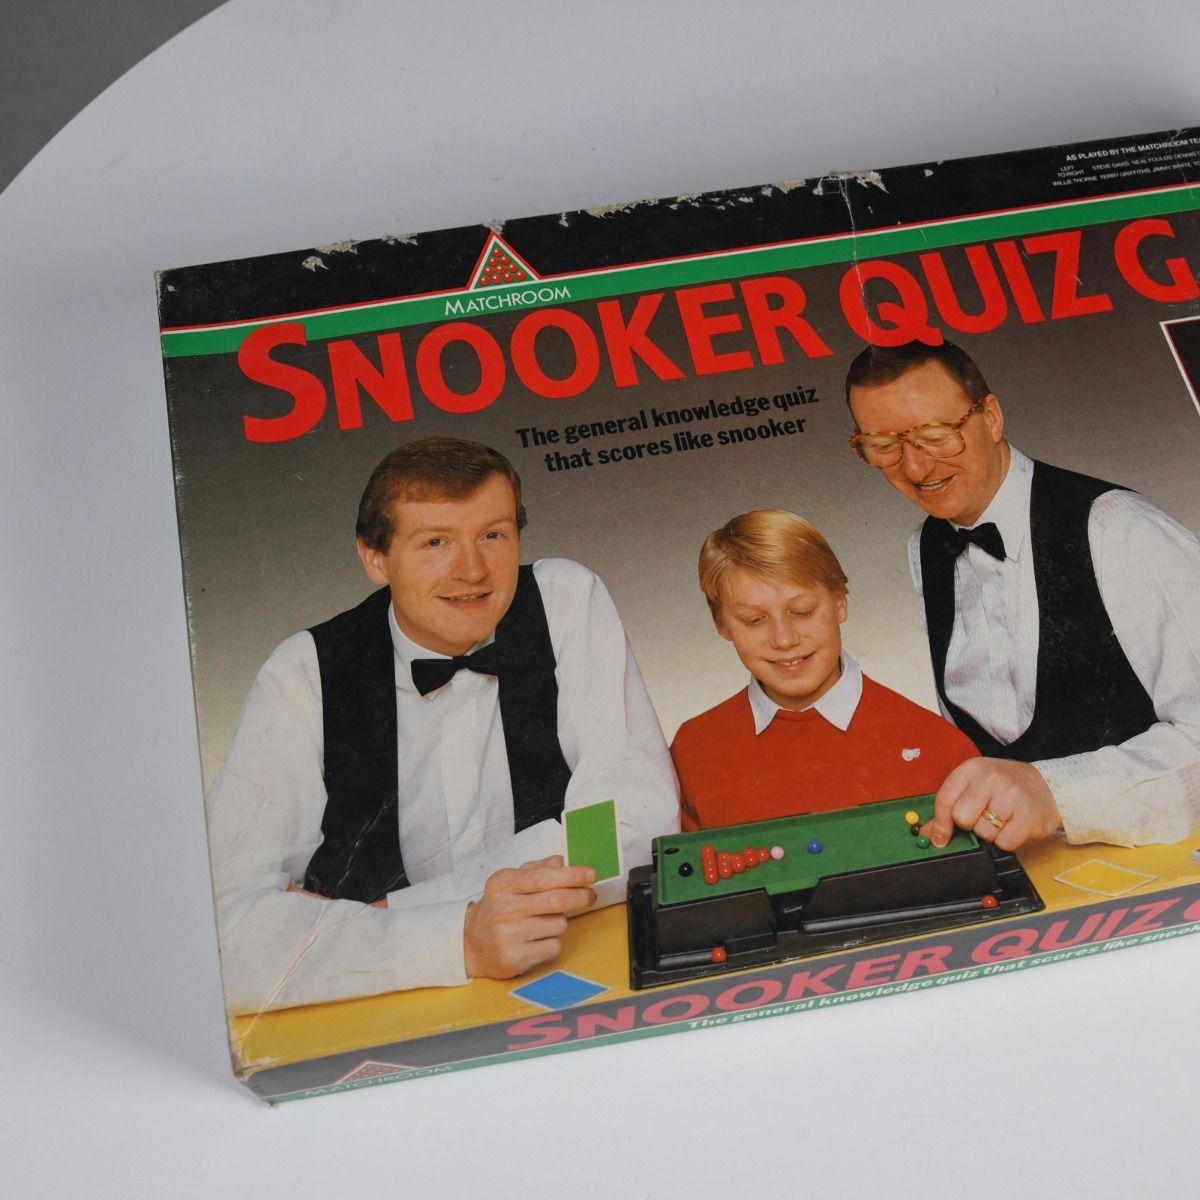 'Snooker Quiz Game' 1987 Board Game